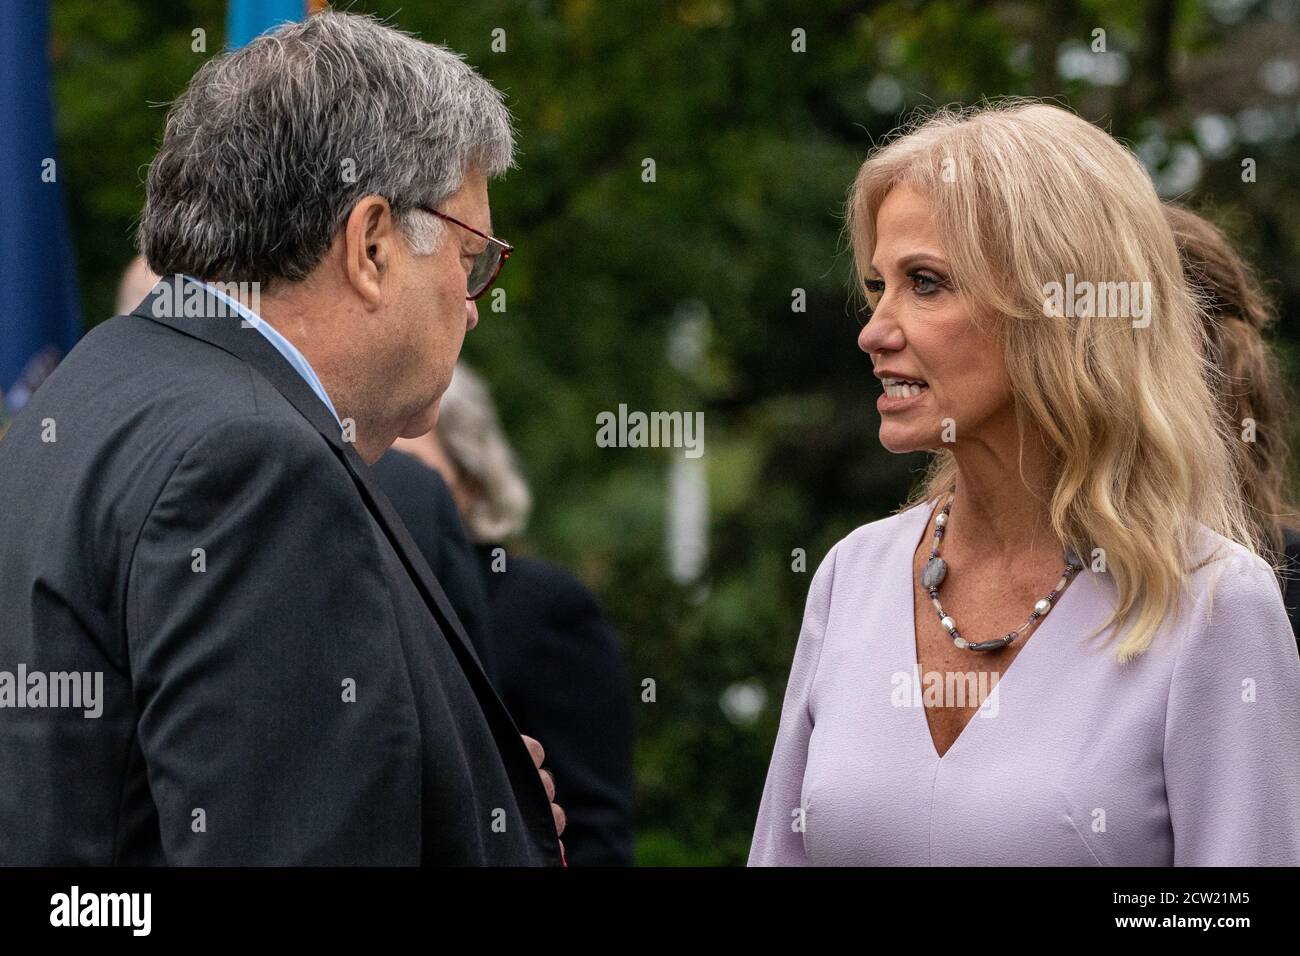 United States Attorney General William P. Barr speaks with Assistant to the President and Senior Counselor to the President Kellyanne Conway in the Rose Garden of the White House after President Donald Trump announced the nomination of Judge Amy Coney Barrett for the Supreme Court seat left vacant by Justice Ruth Bader Ginsburg's death last week September, 26, 2020 in Washington DC. The Republican-controlled Senate now has little time if they opt to confirm the nominee ahead of Election Day. (Photo by Photo Ken Cedeno/Sipa USA ) Credit: Sipa USA/Alamy Live News Stock Photo